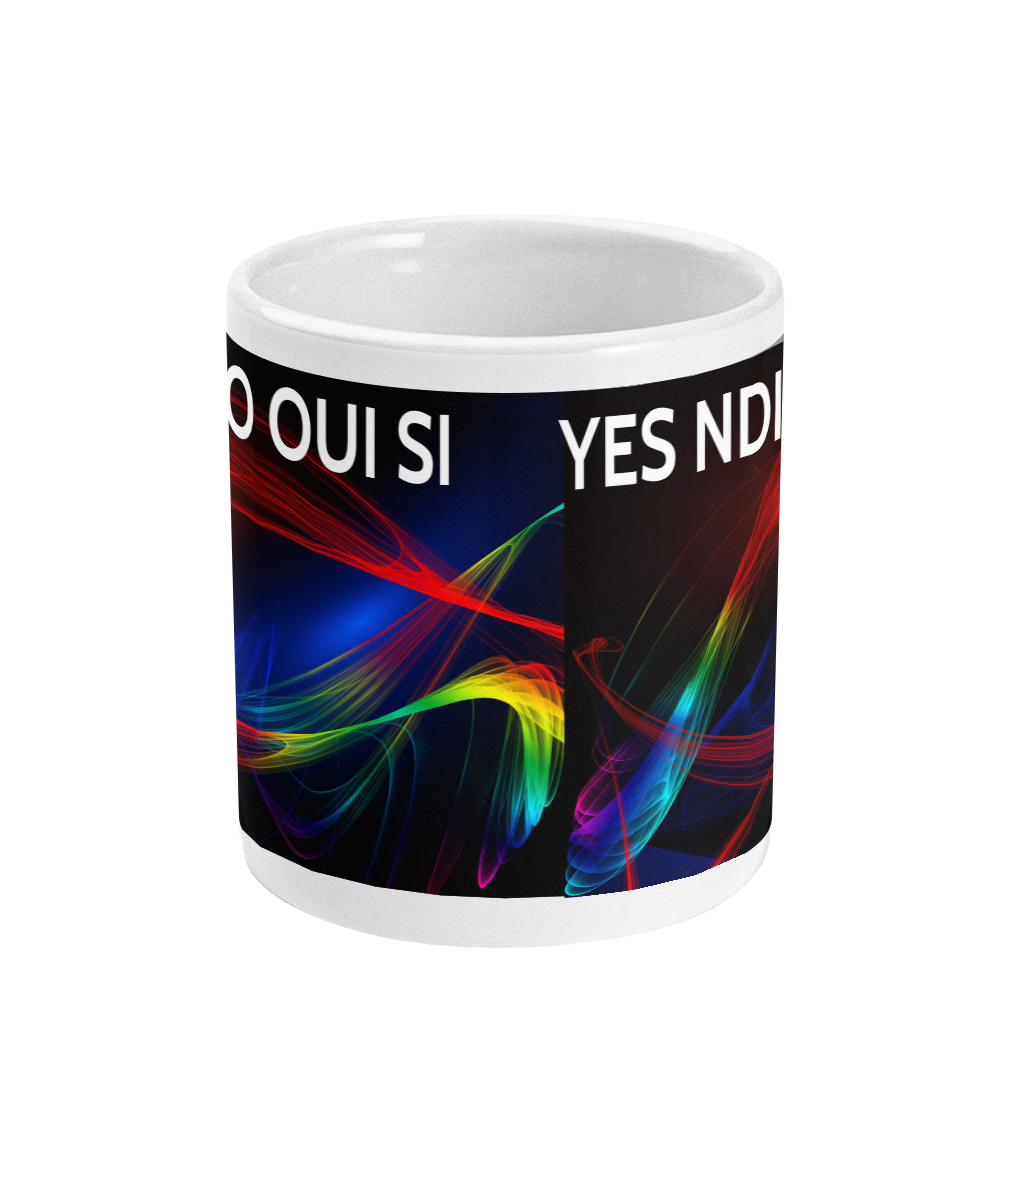 Drinking Mug  with the word "Yes" in 4 languages